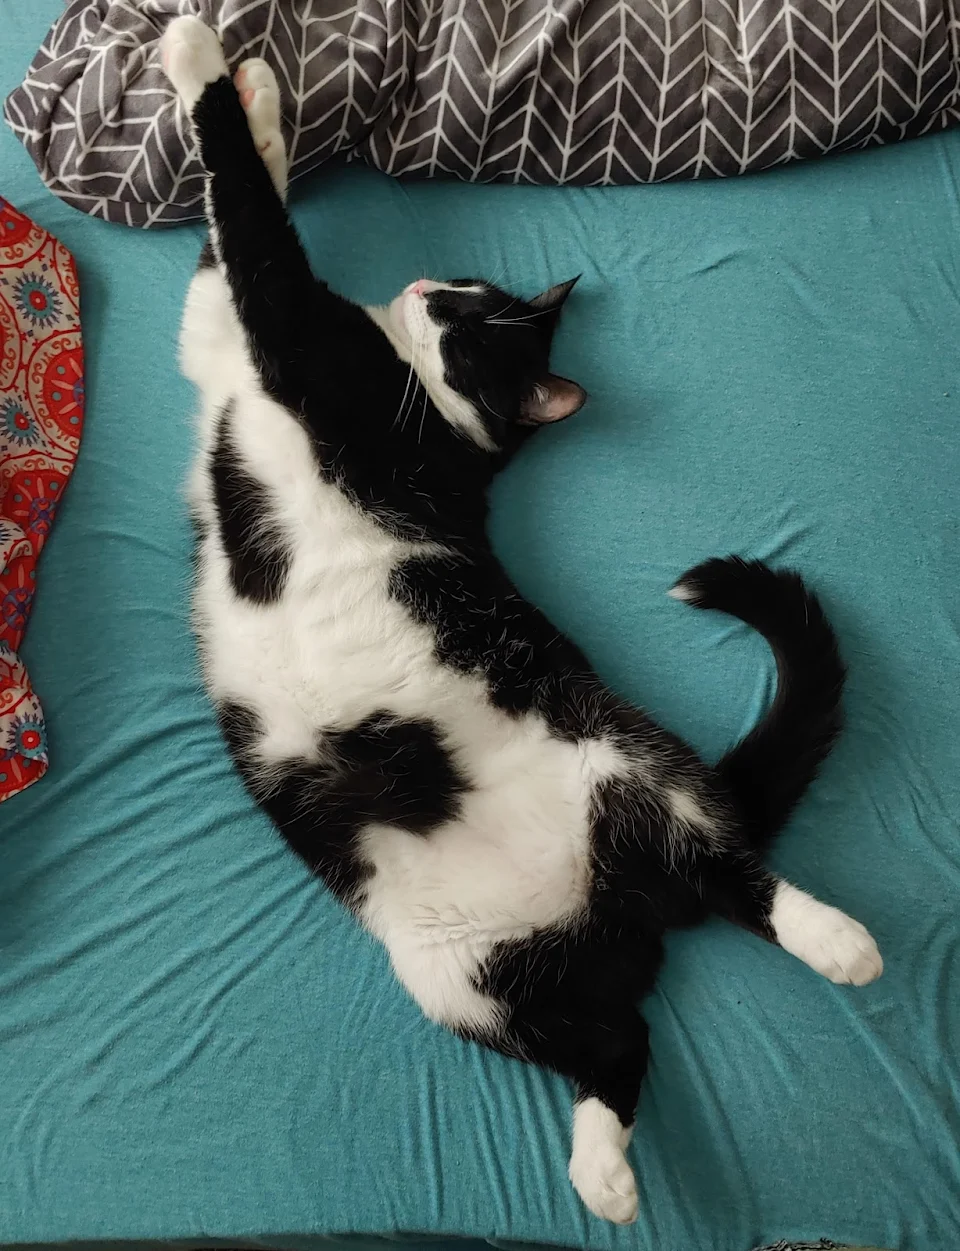 cat stretching in his sleep